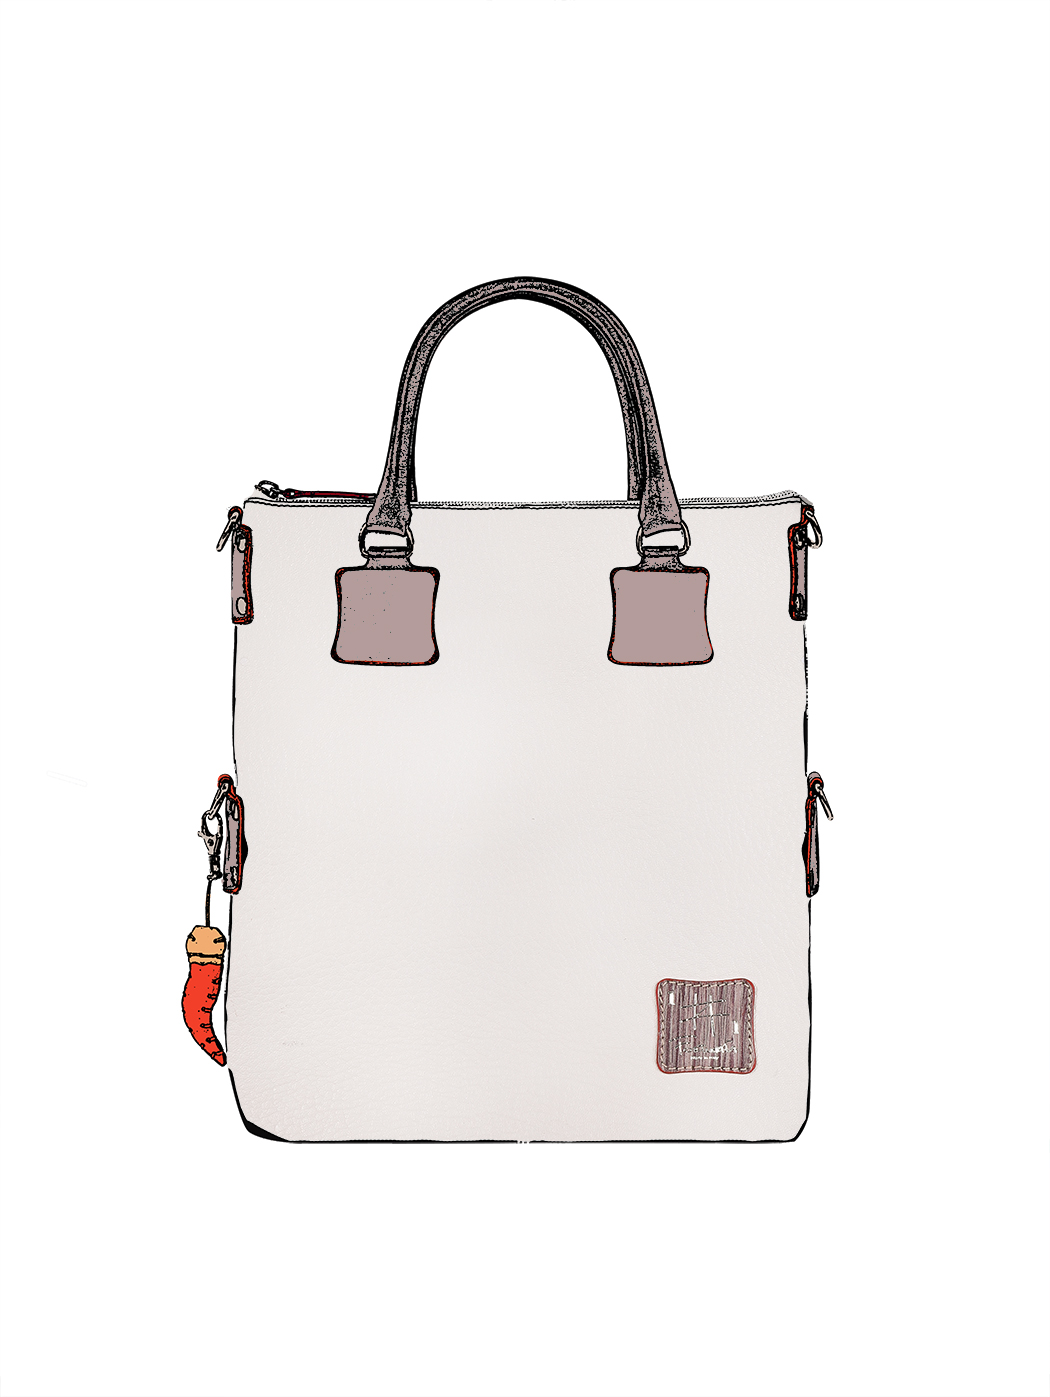 Large Tote Bag Leather White - Handmade in Italy